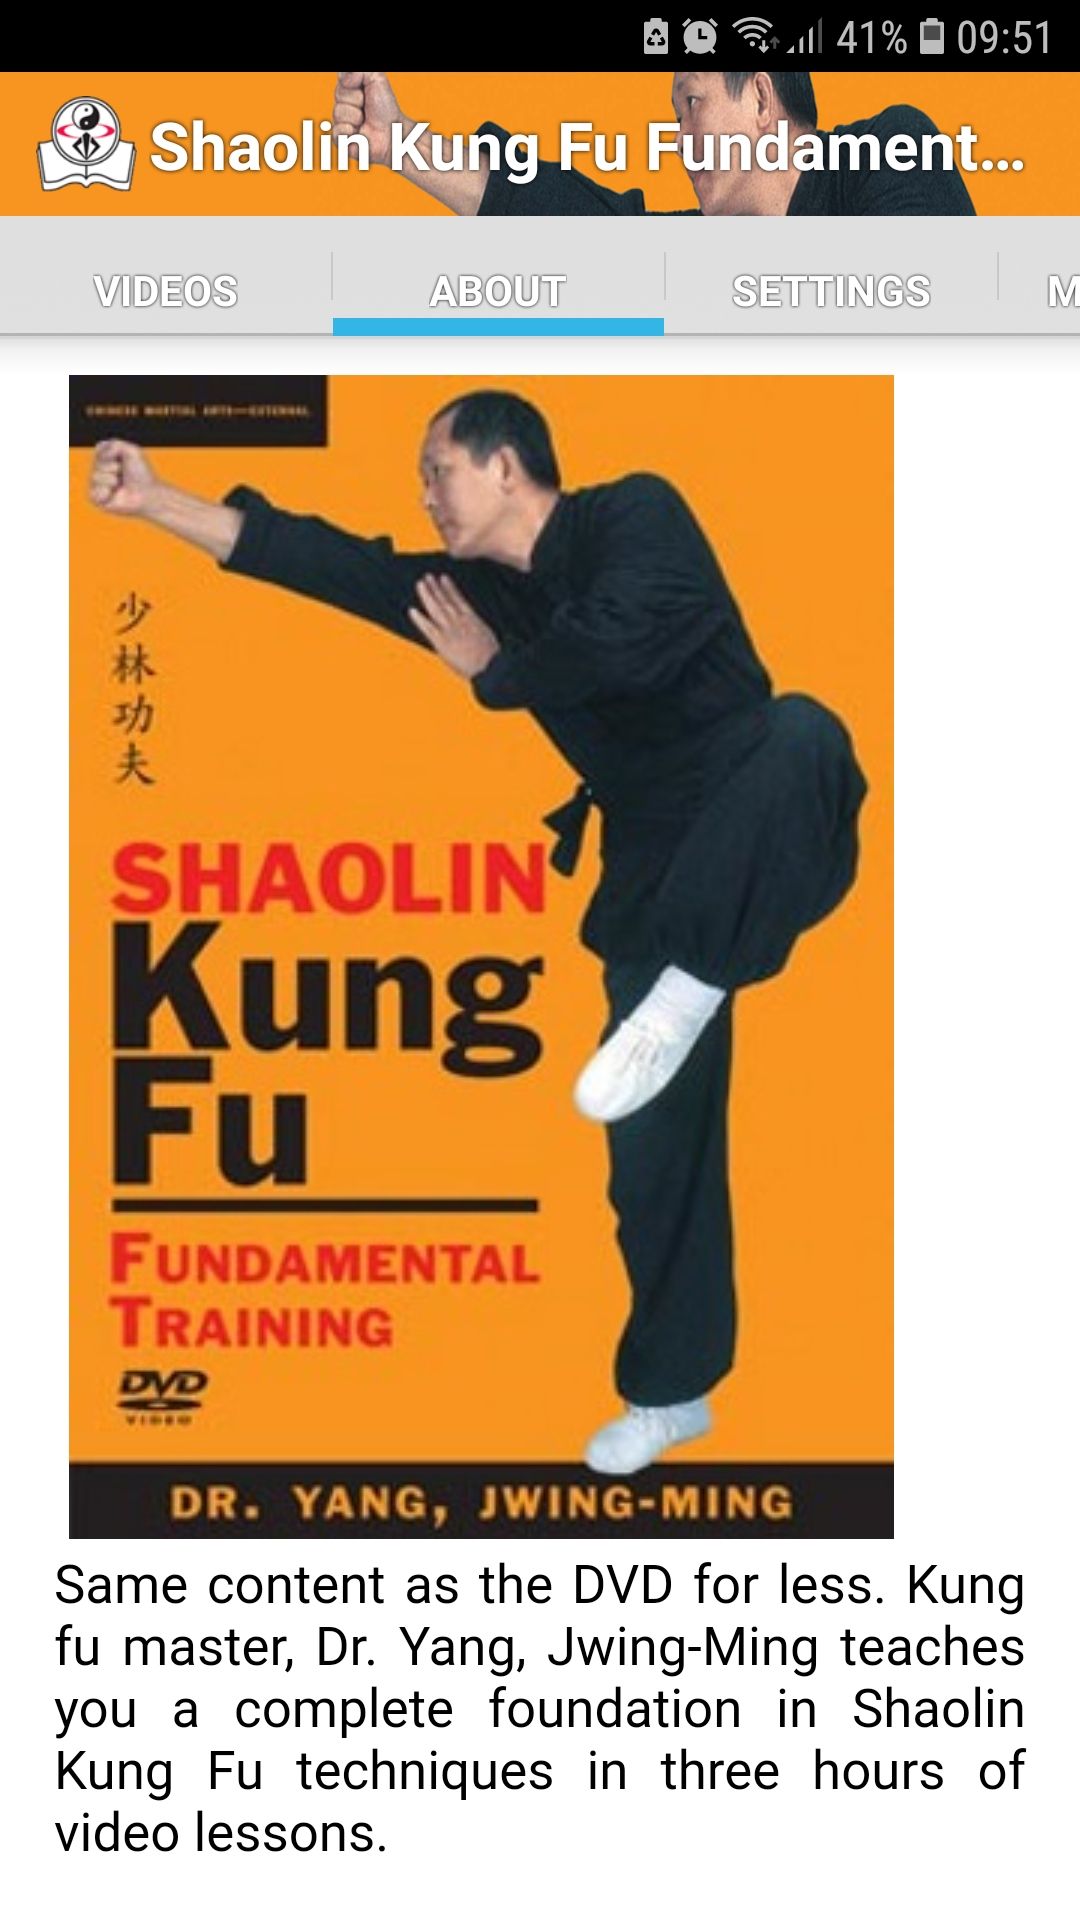 Shaolin Kung Fu mobile app about page